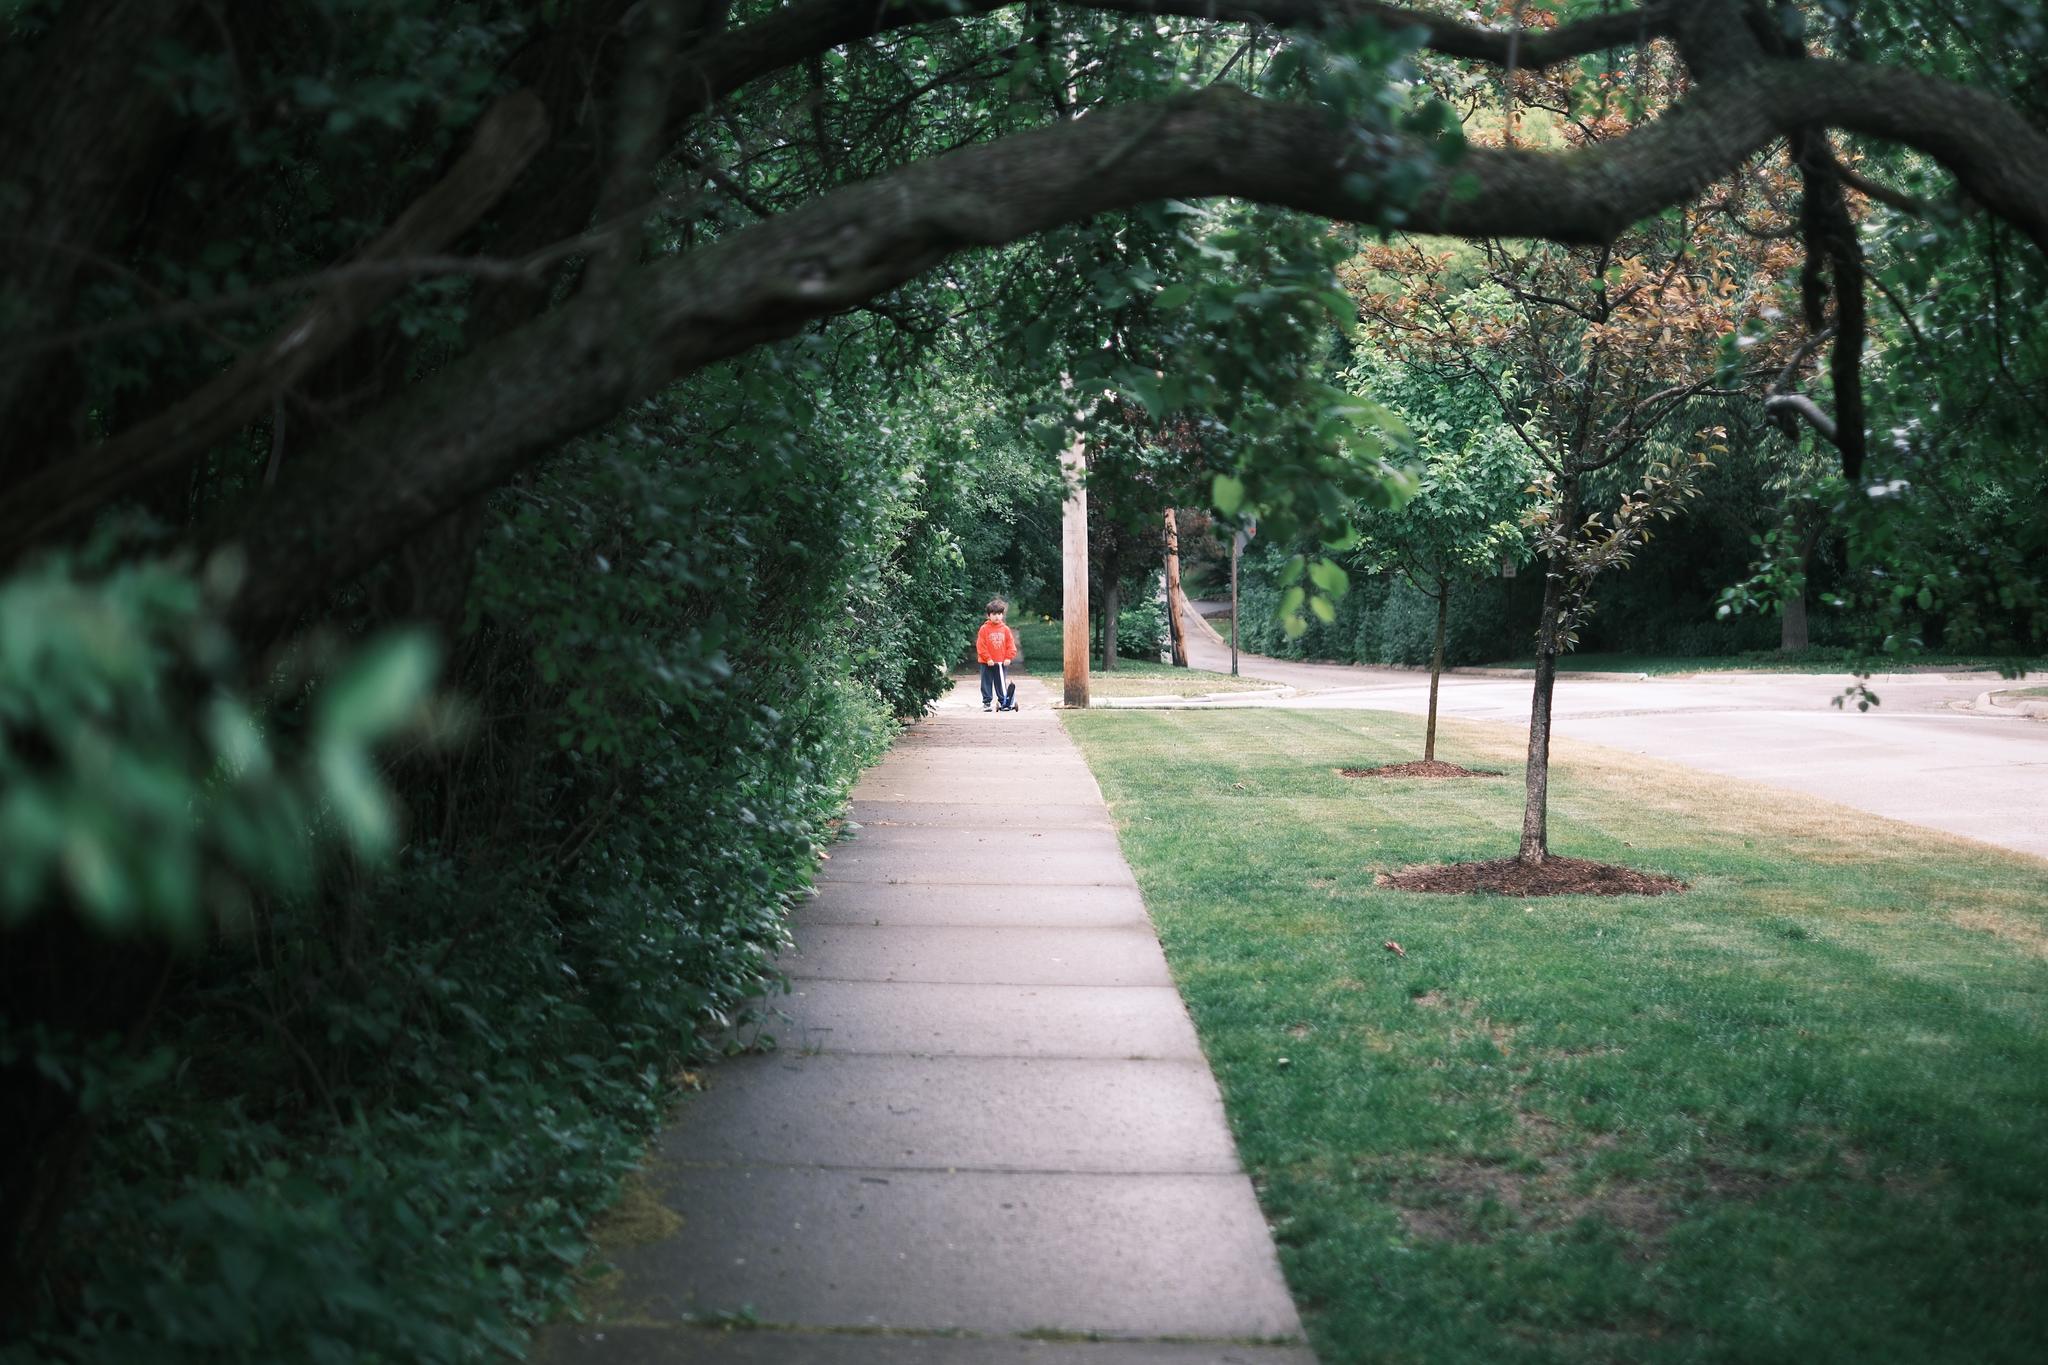 A sidewalk bordered by lush greenery on one side and a grassy area with trees on the other, with a person walking in the distance